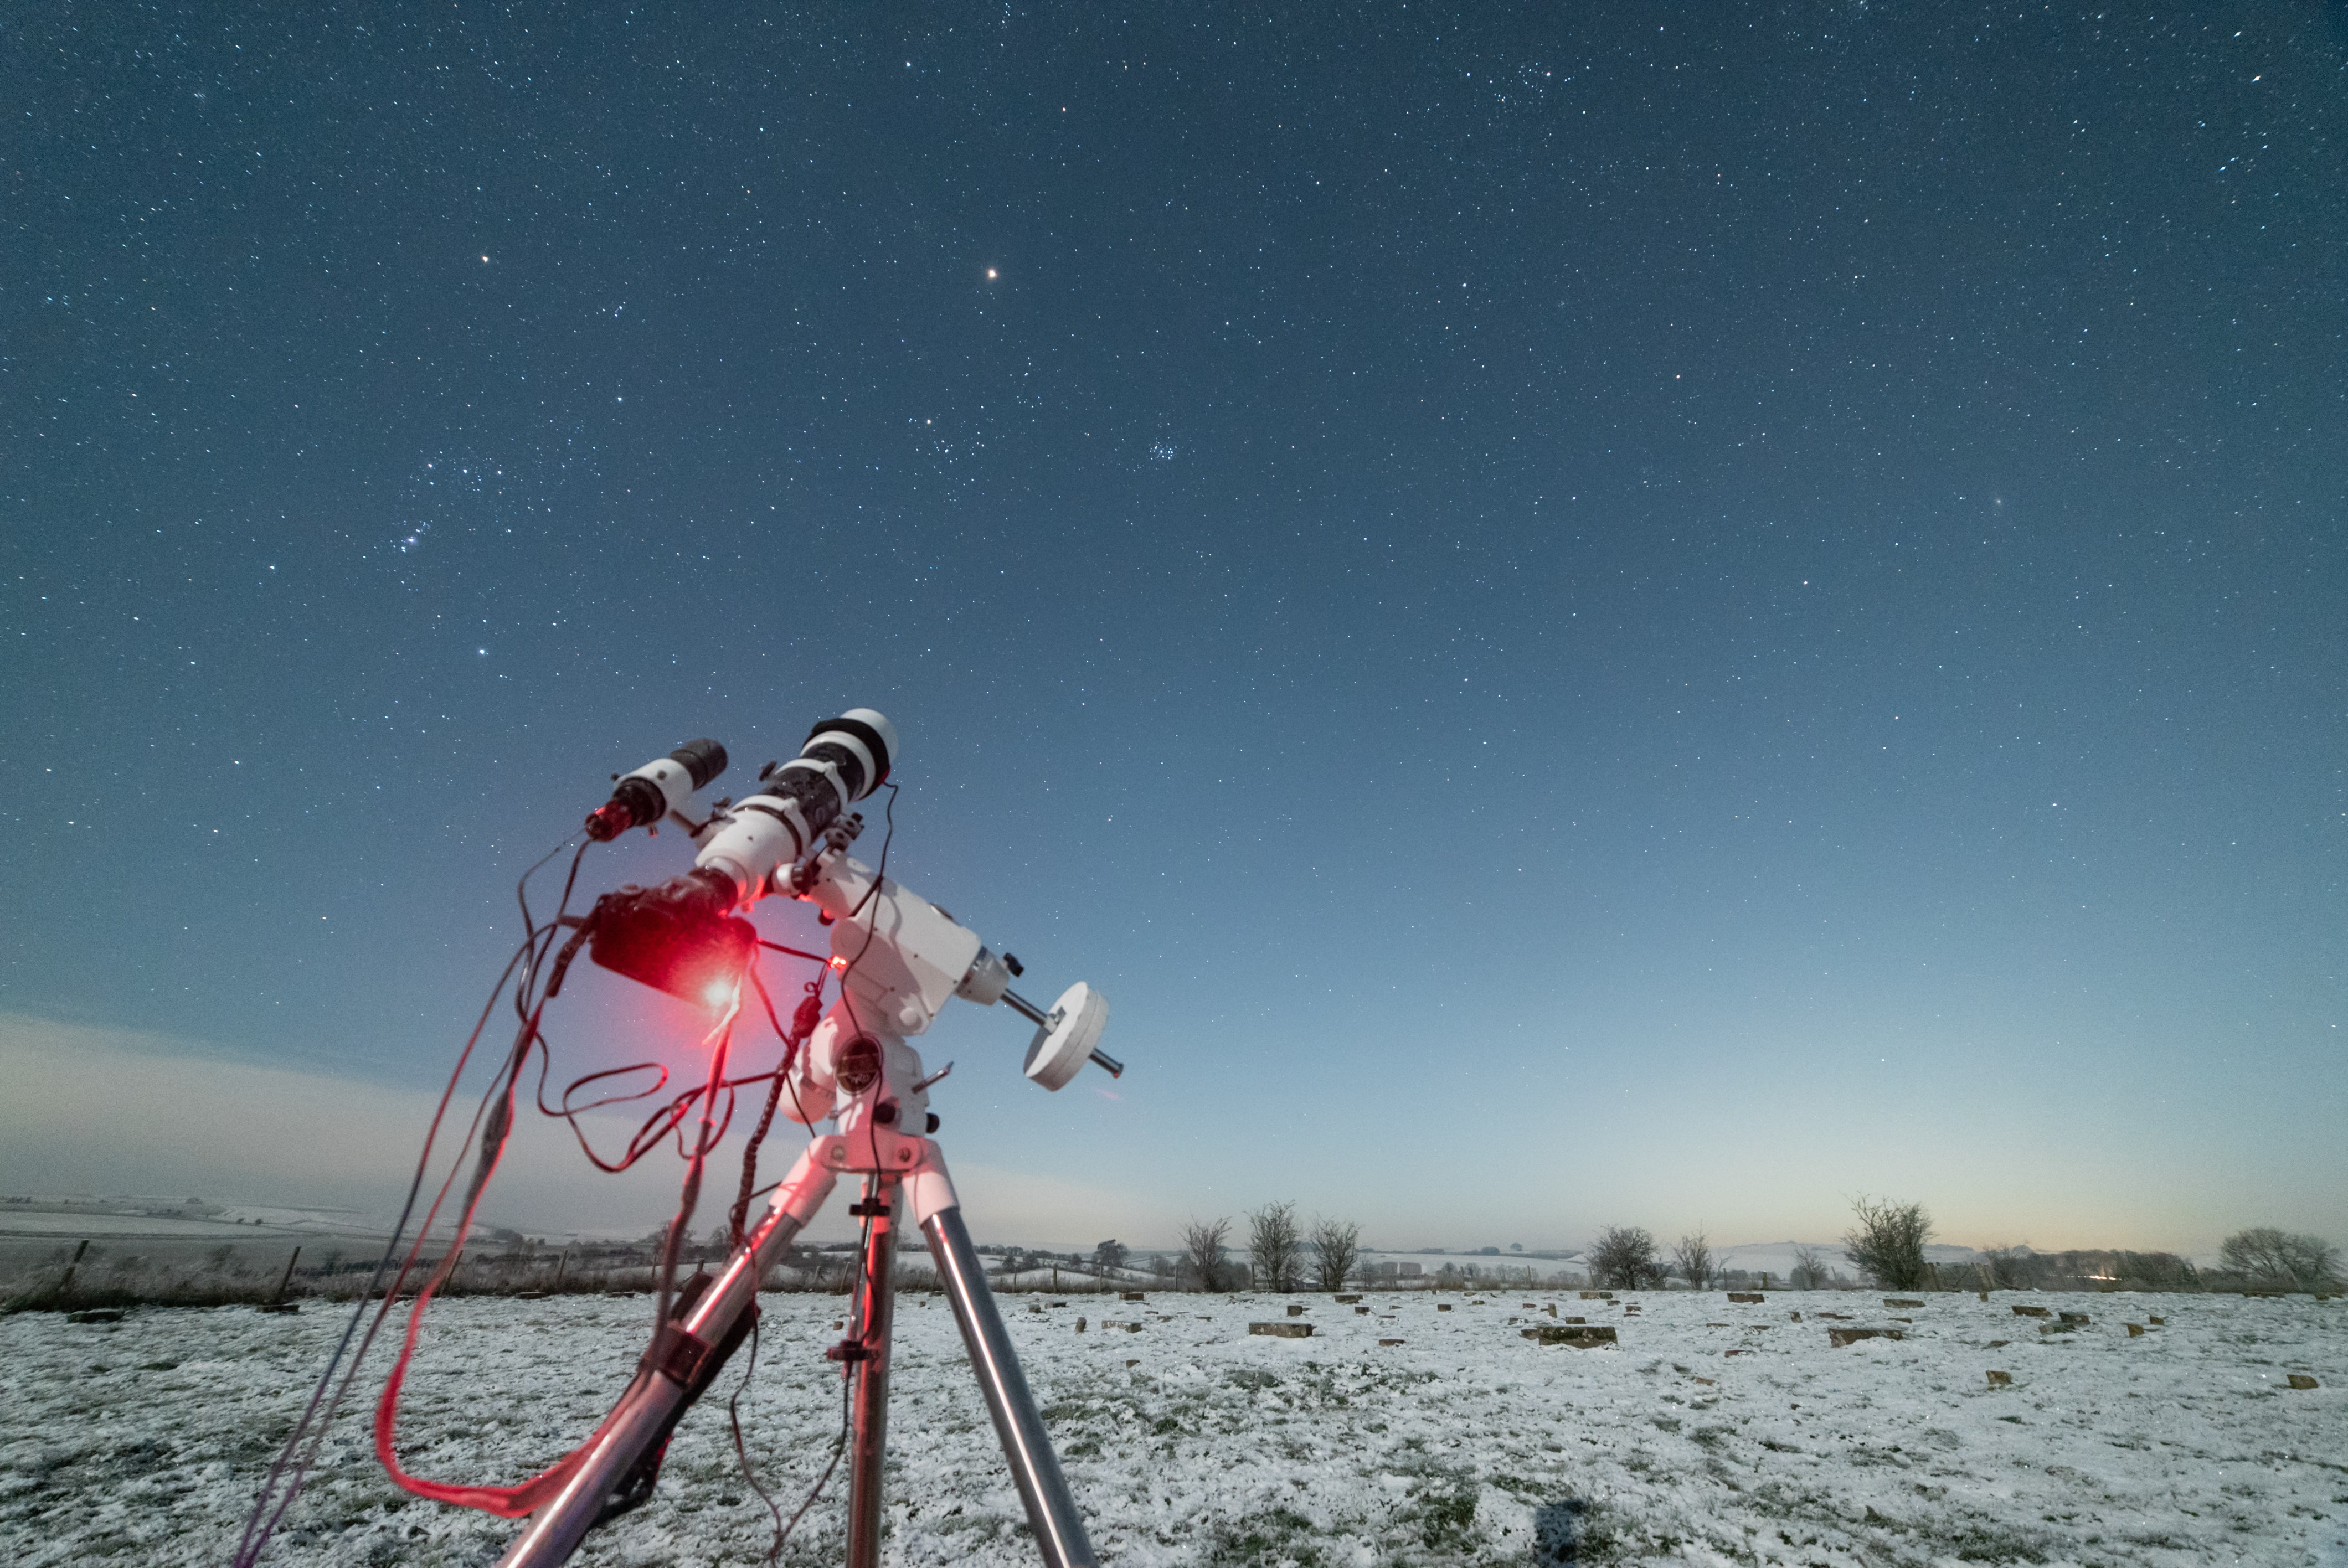 A telescope pointed towards the night sky.